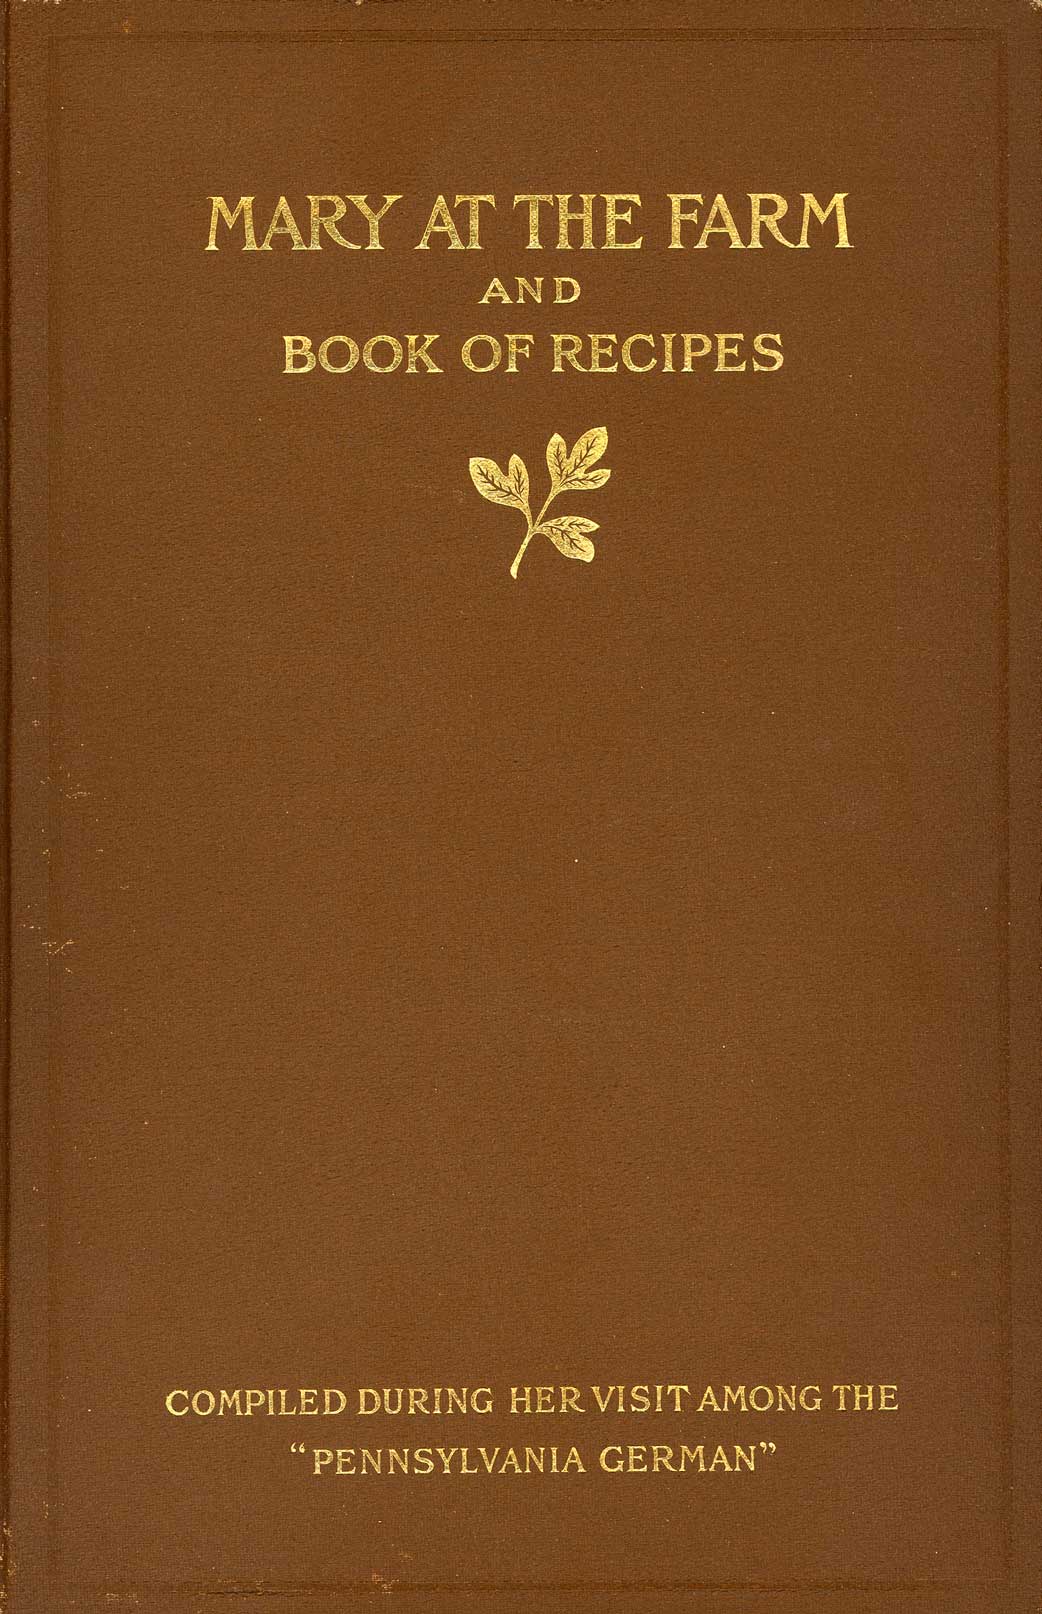 Mary at the farm and book of recipes : compiled during her visit among the "Pennsylvania Germans"